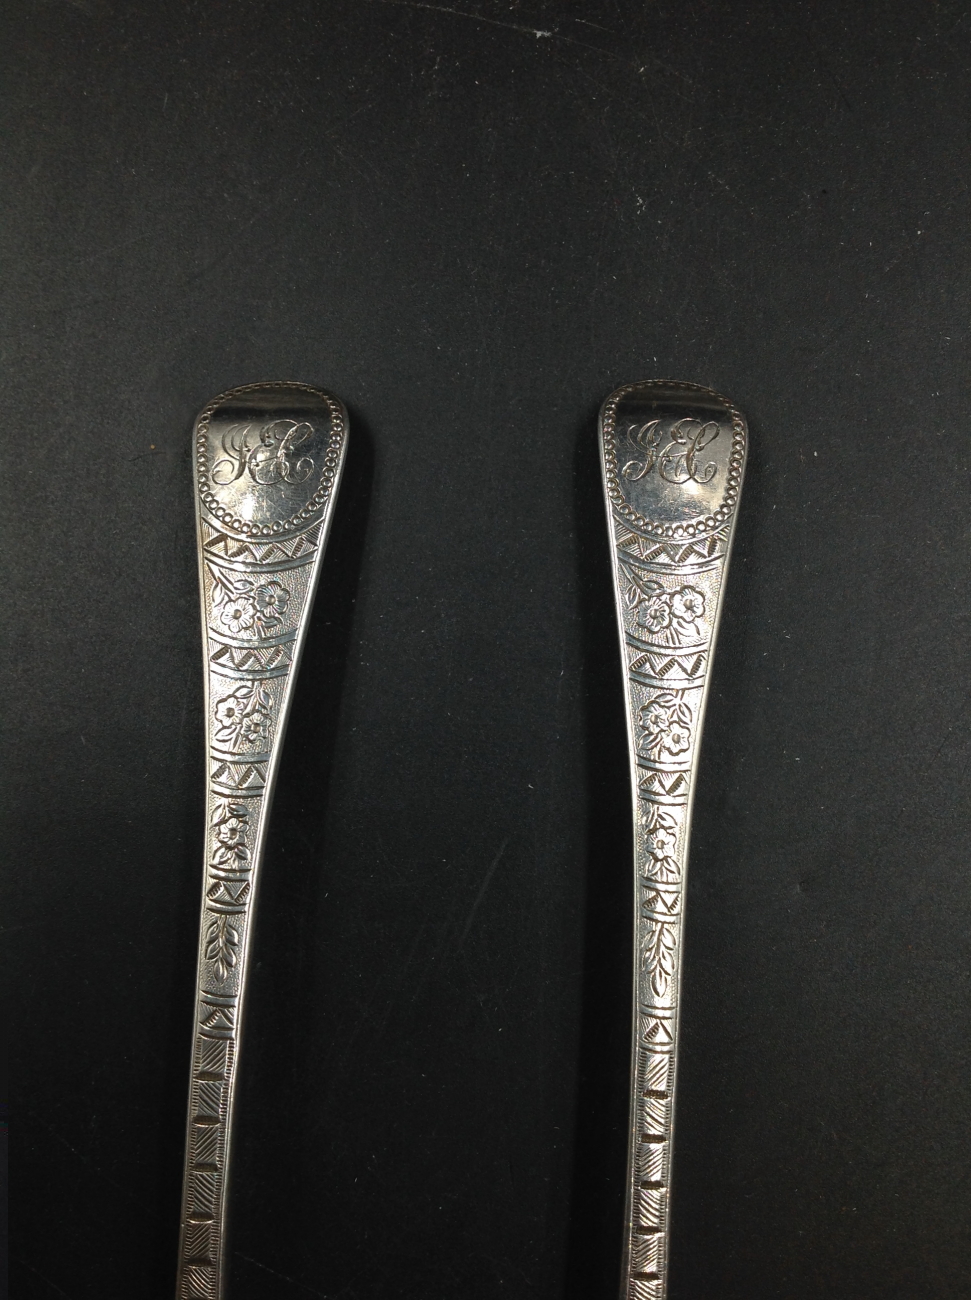 A PAIR OF GEORGIAN SILVER HALLMARKED SPOONS DECORATED WITH BAMBOO, BIRDS AND FOLIAGE DATED LONDON - Image 3 of 5